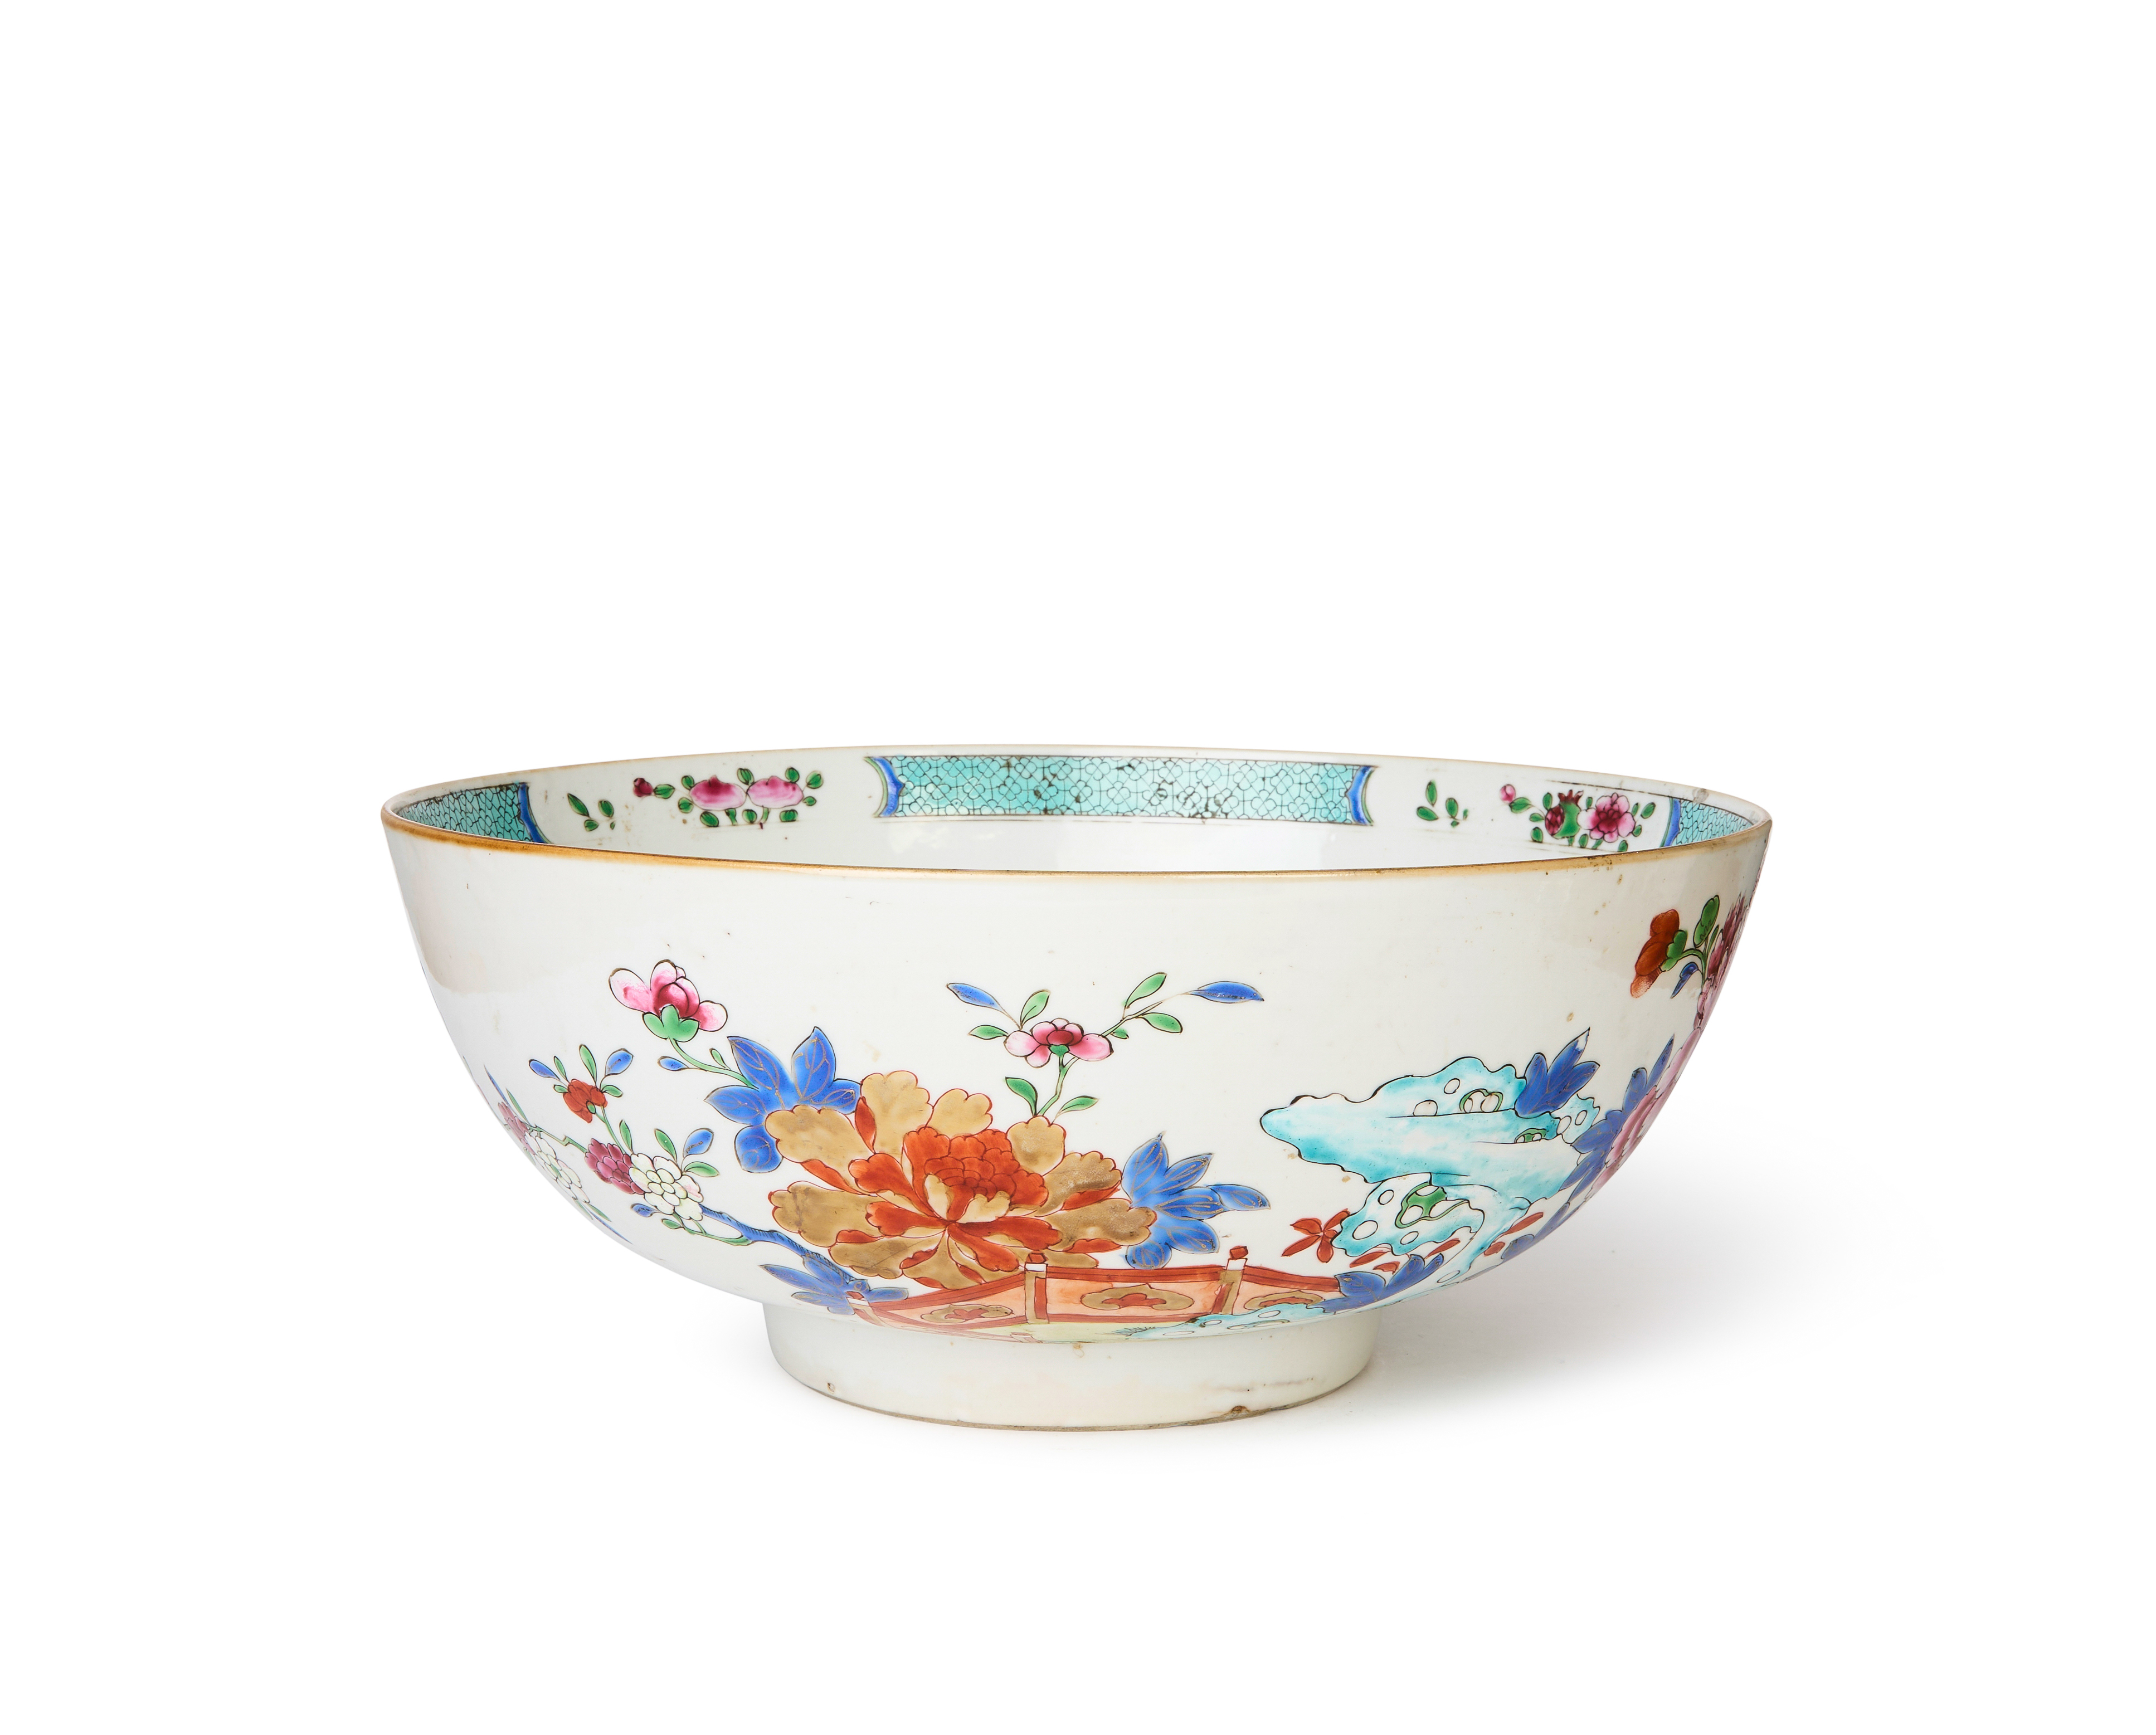 A CHINESE FAMILLE ROSE PUNCH BOWL, QIANLONG PERIOD (1736-1795) - Image 2 of 5